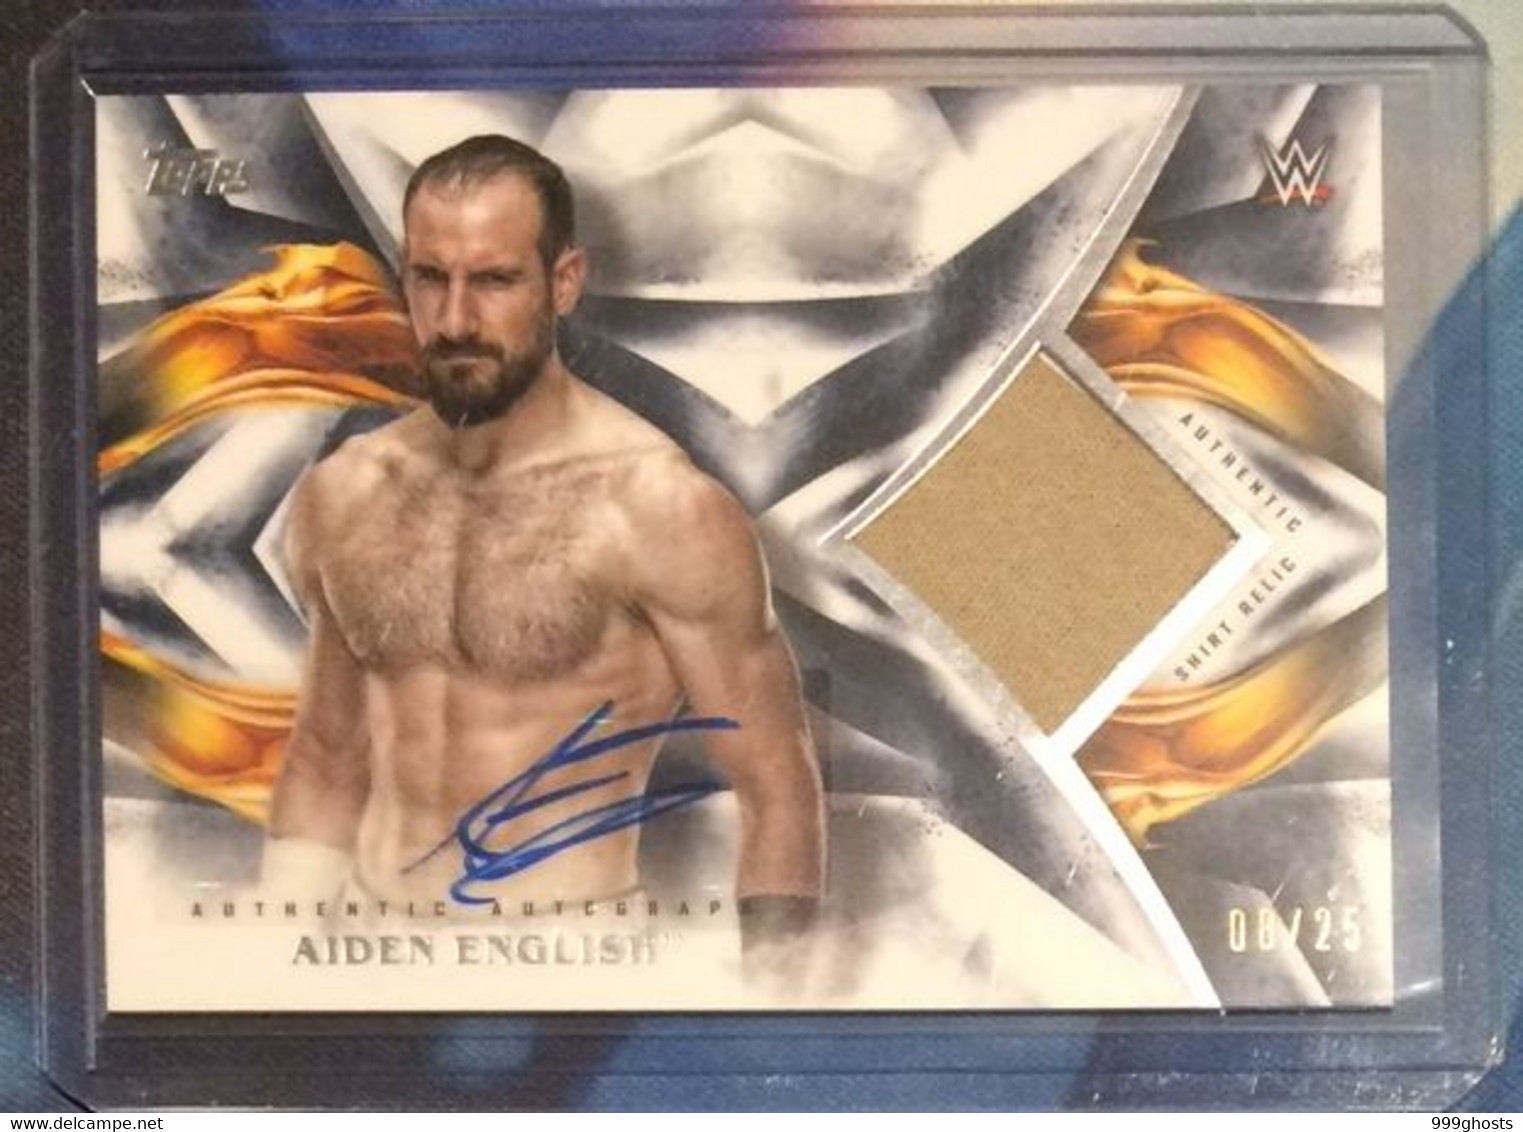 2019 TOPPS Undisputed 08/25 AIDEN ENGLISH Autograph Relic Signed Trading Card WWE Wrestling - Trading Cards